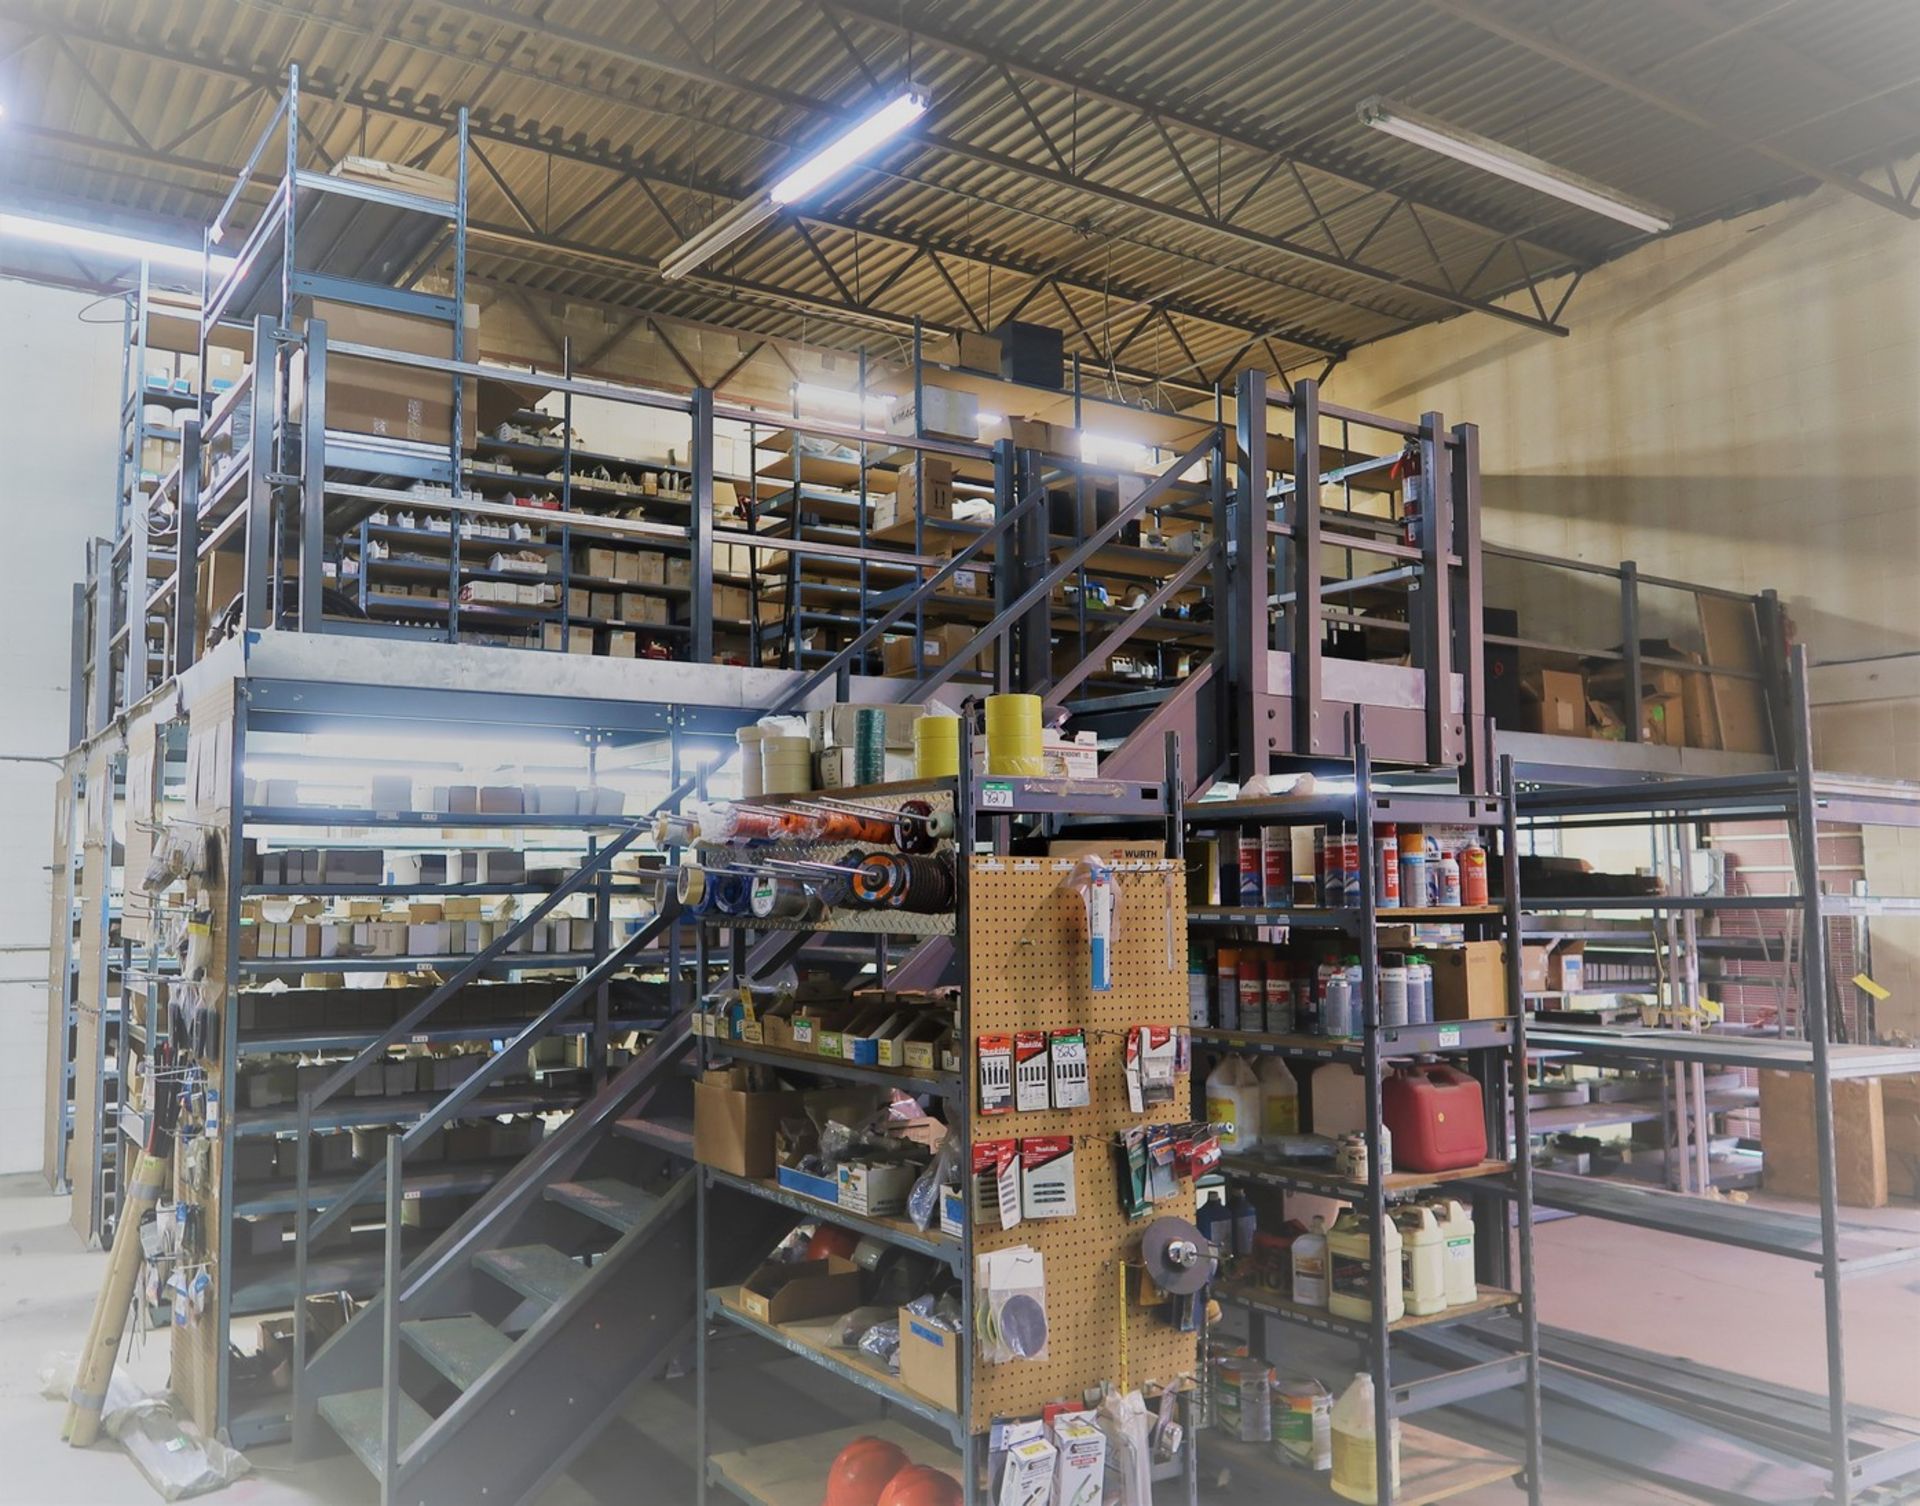 FREE STANDING MEZZANINE SYSTEM W/STAIRS, 4-6 SECTION EZIRACK PARTS SHELVING